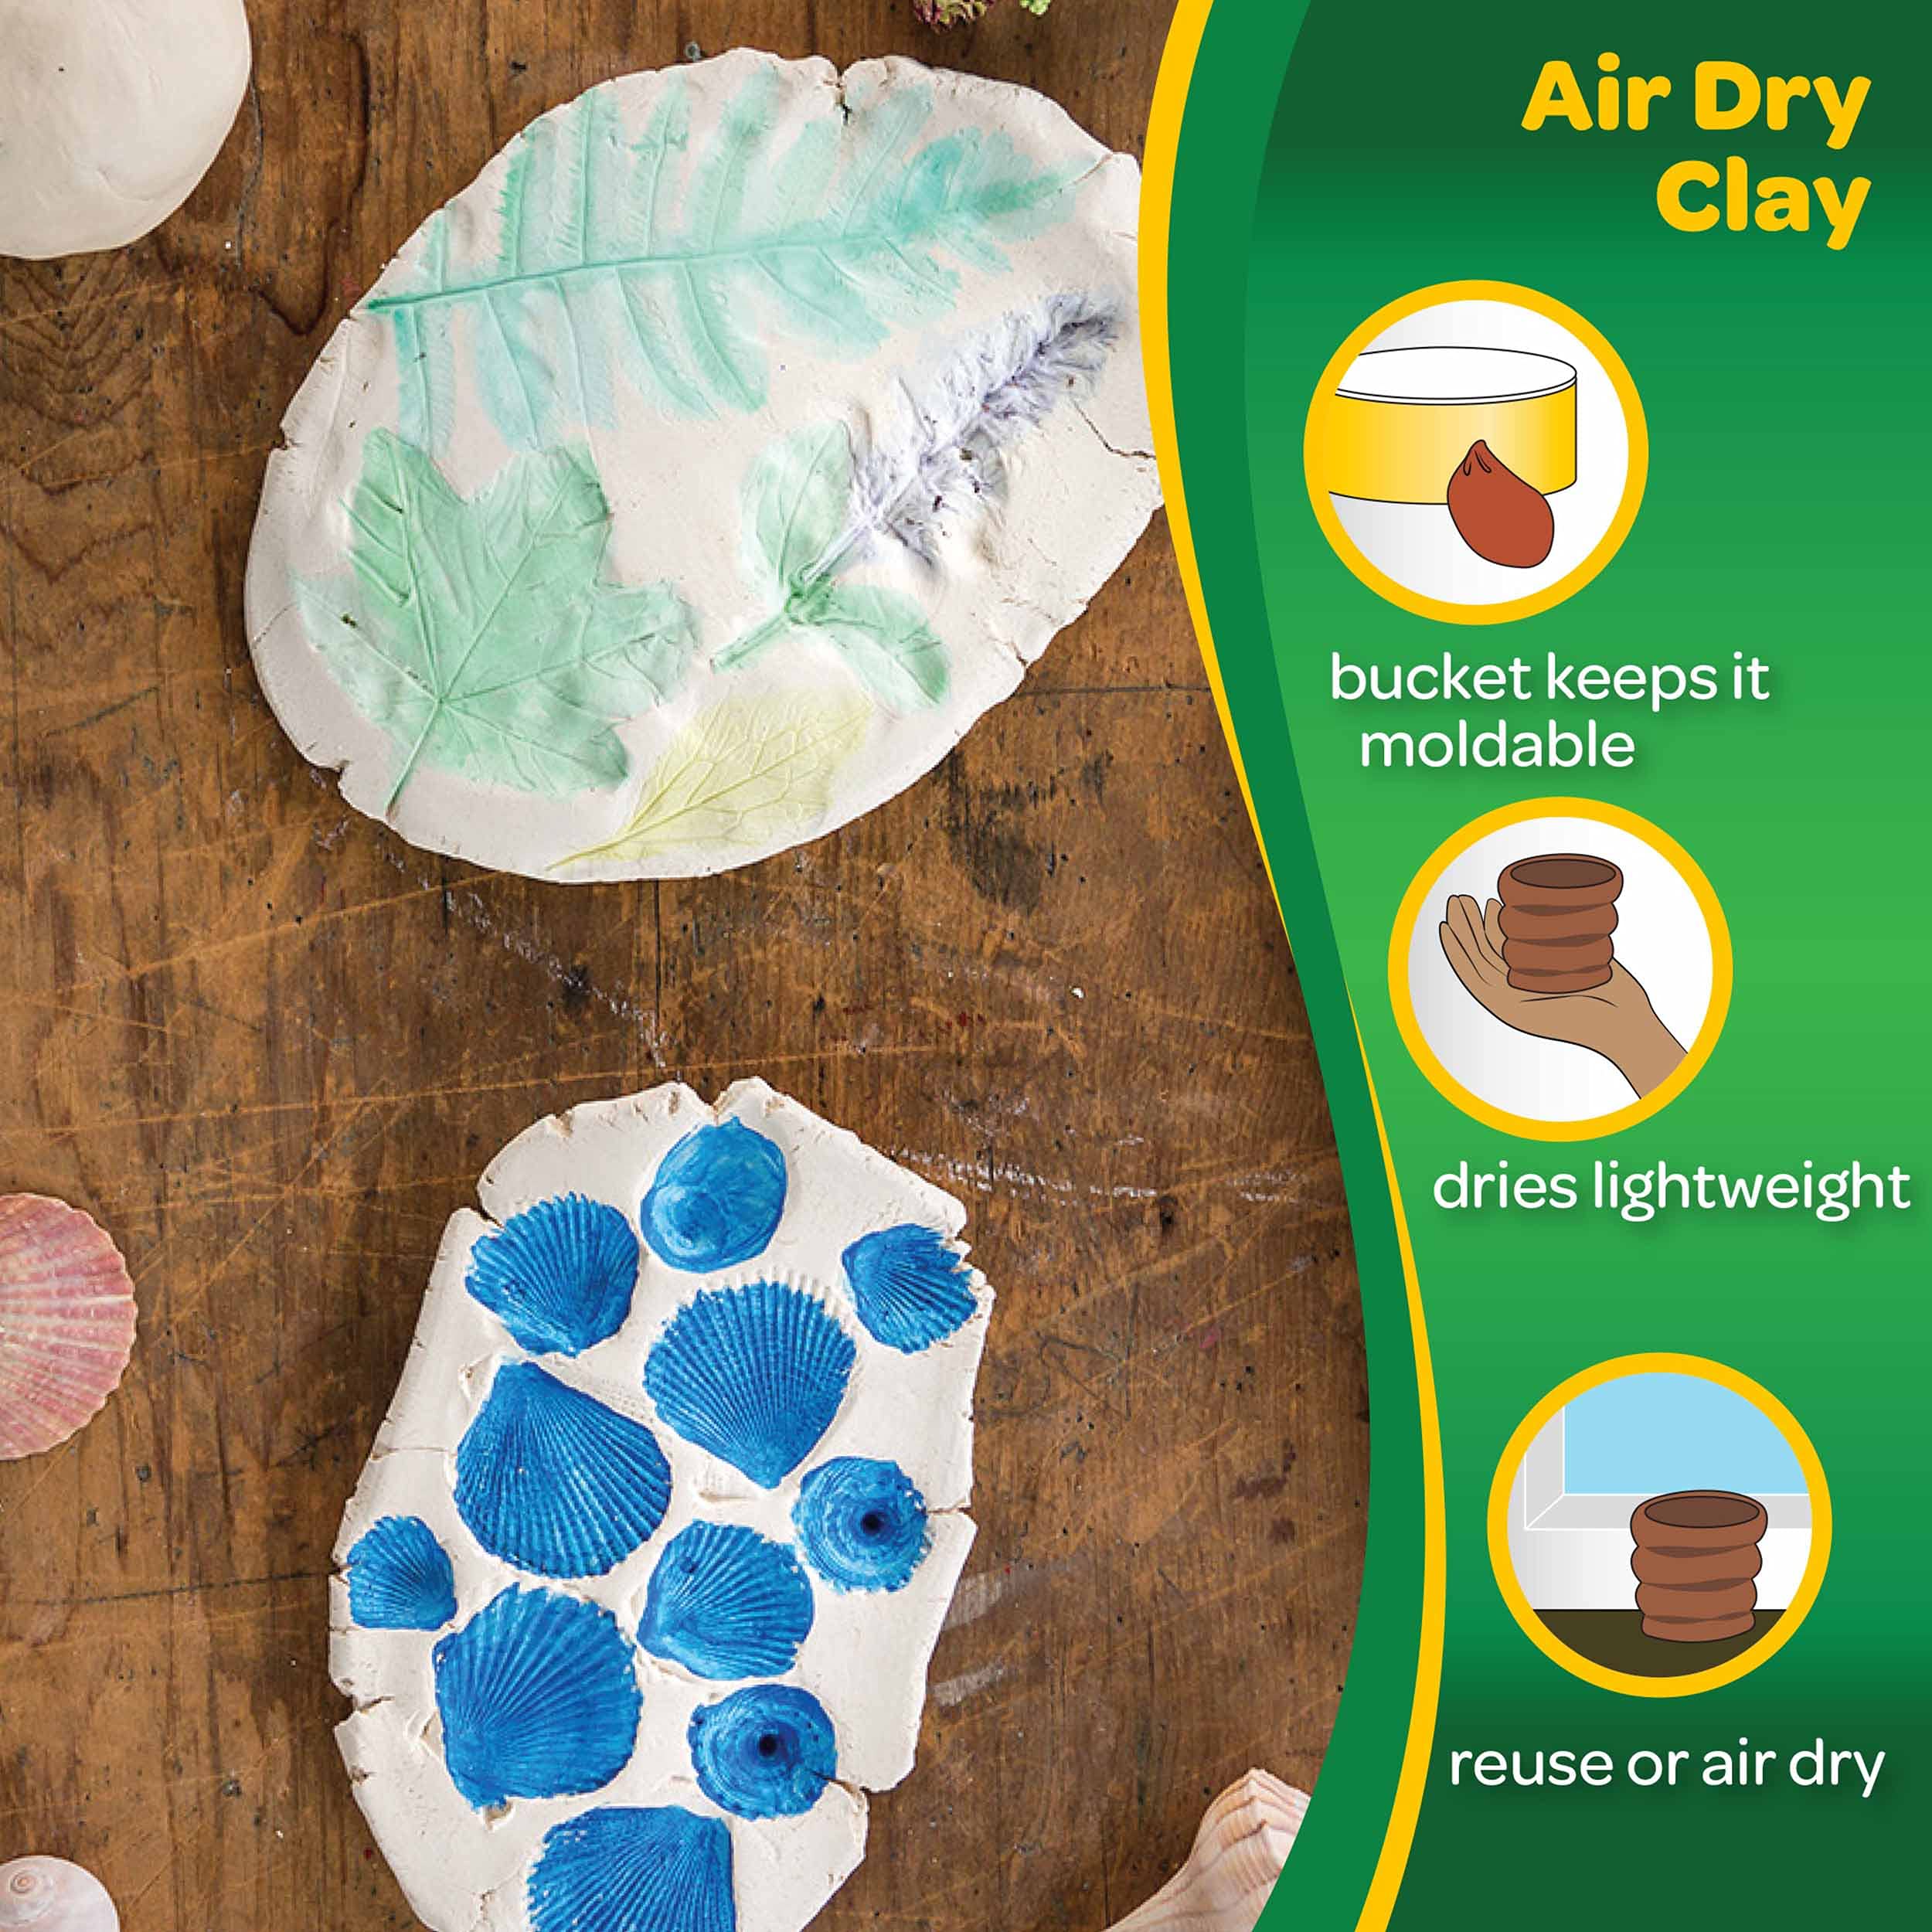 Crayola Air Dry Clay, White, Modeling Clay for Kids, Back to School Crafts, 25lb